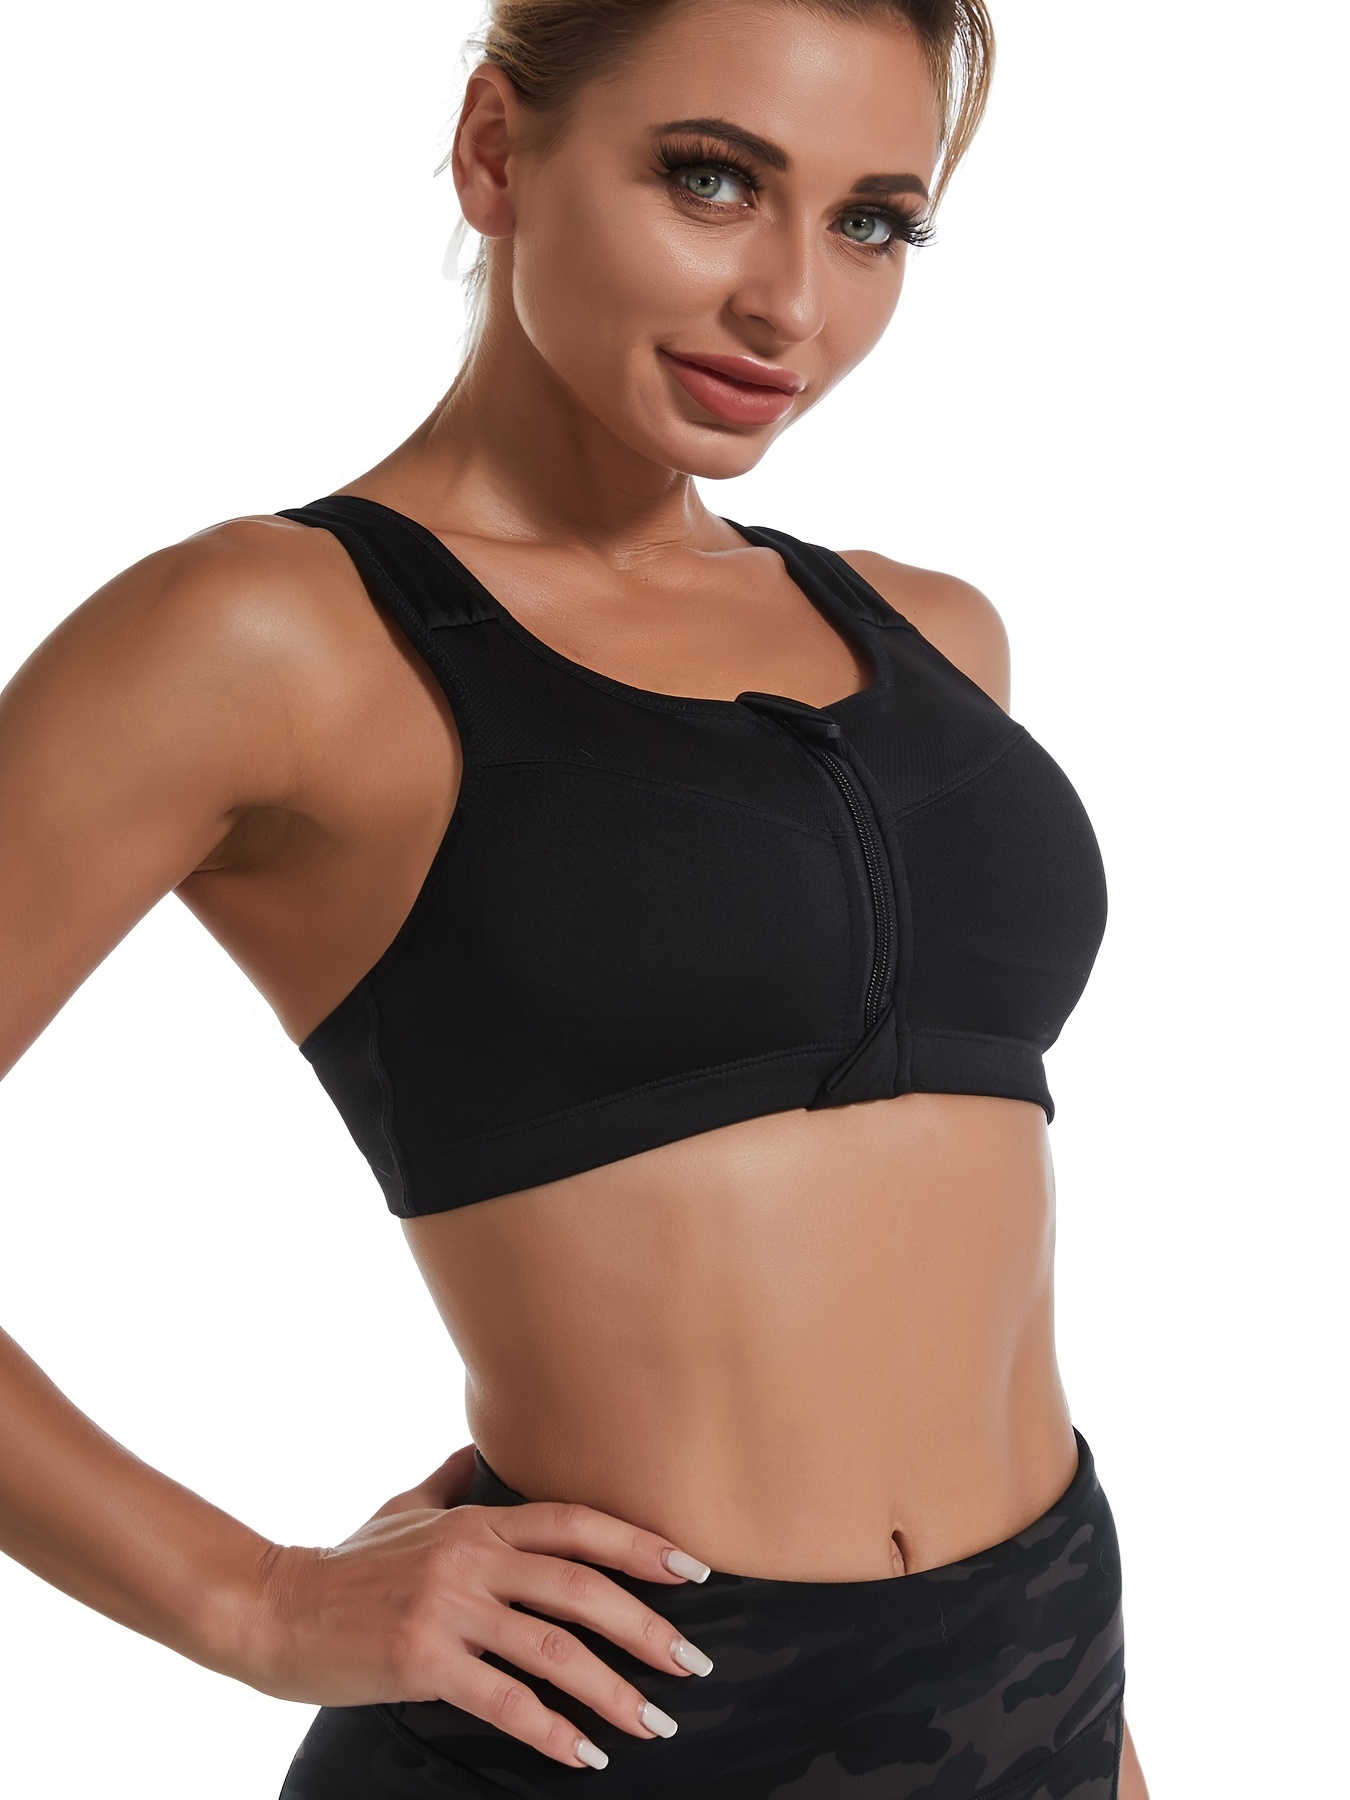 Sports Bra Women Sexy Quick Dry Padded Wirefree Adjustable Fitness